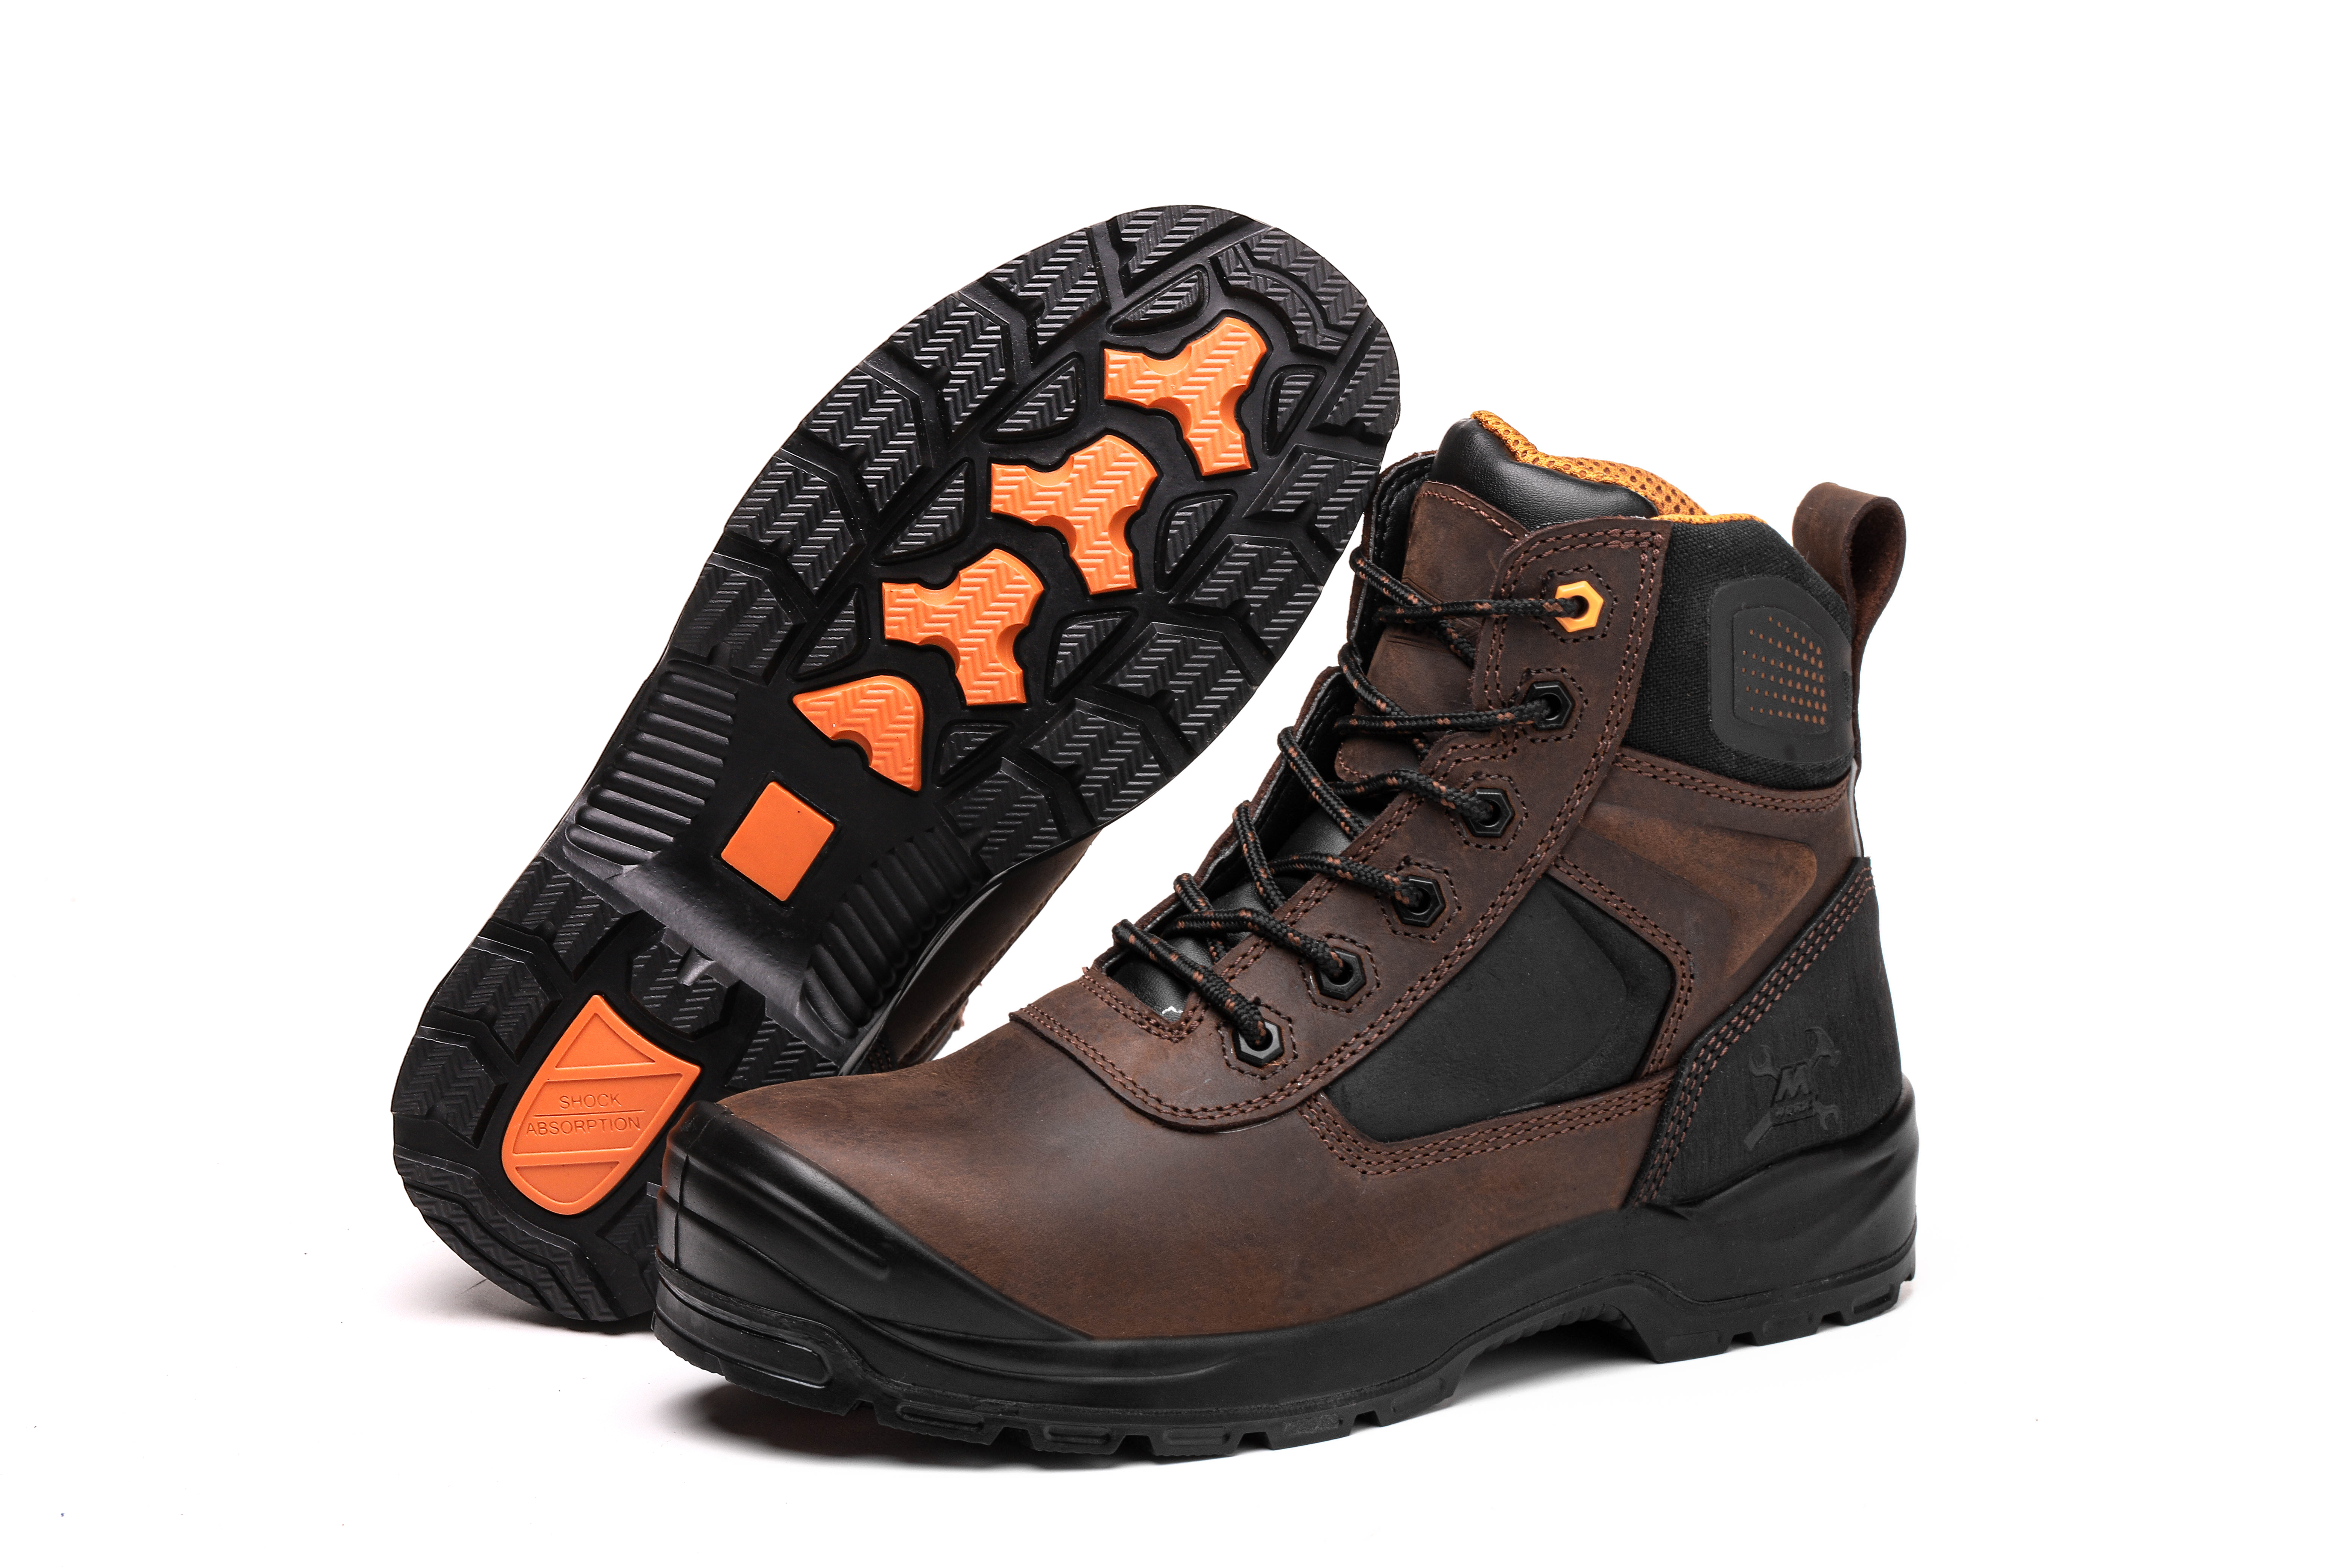 6 IN. Brown Thor  Composite toe&Plate Water Resistant No Metal Work Boot